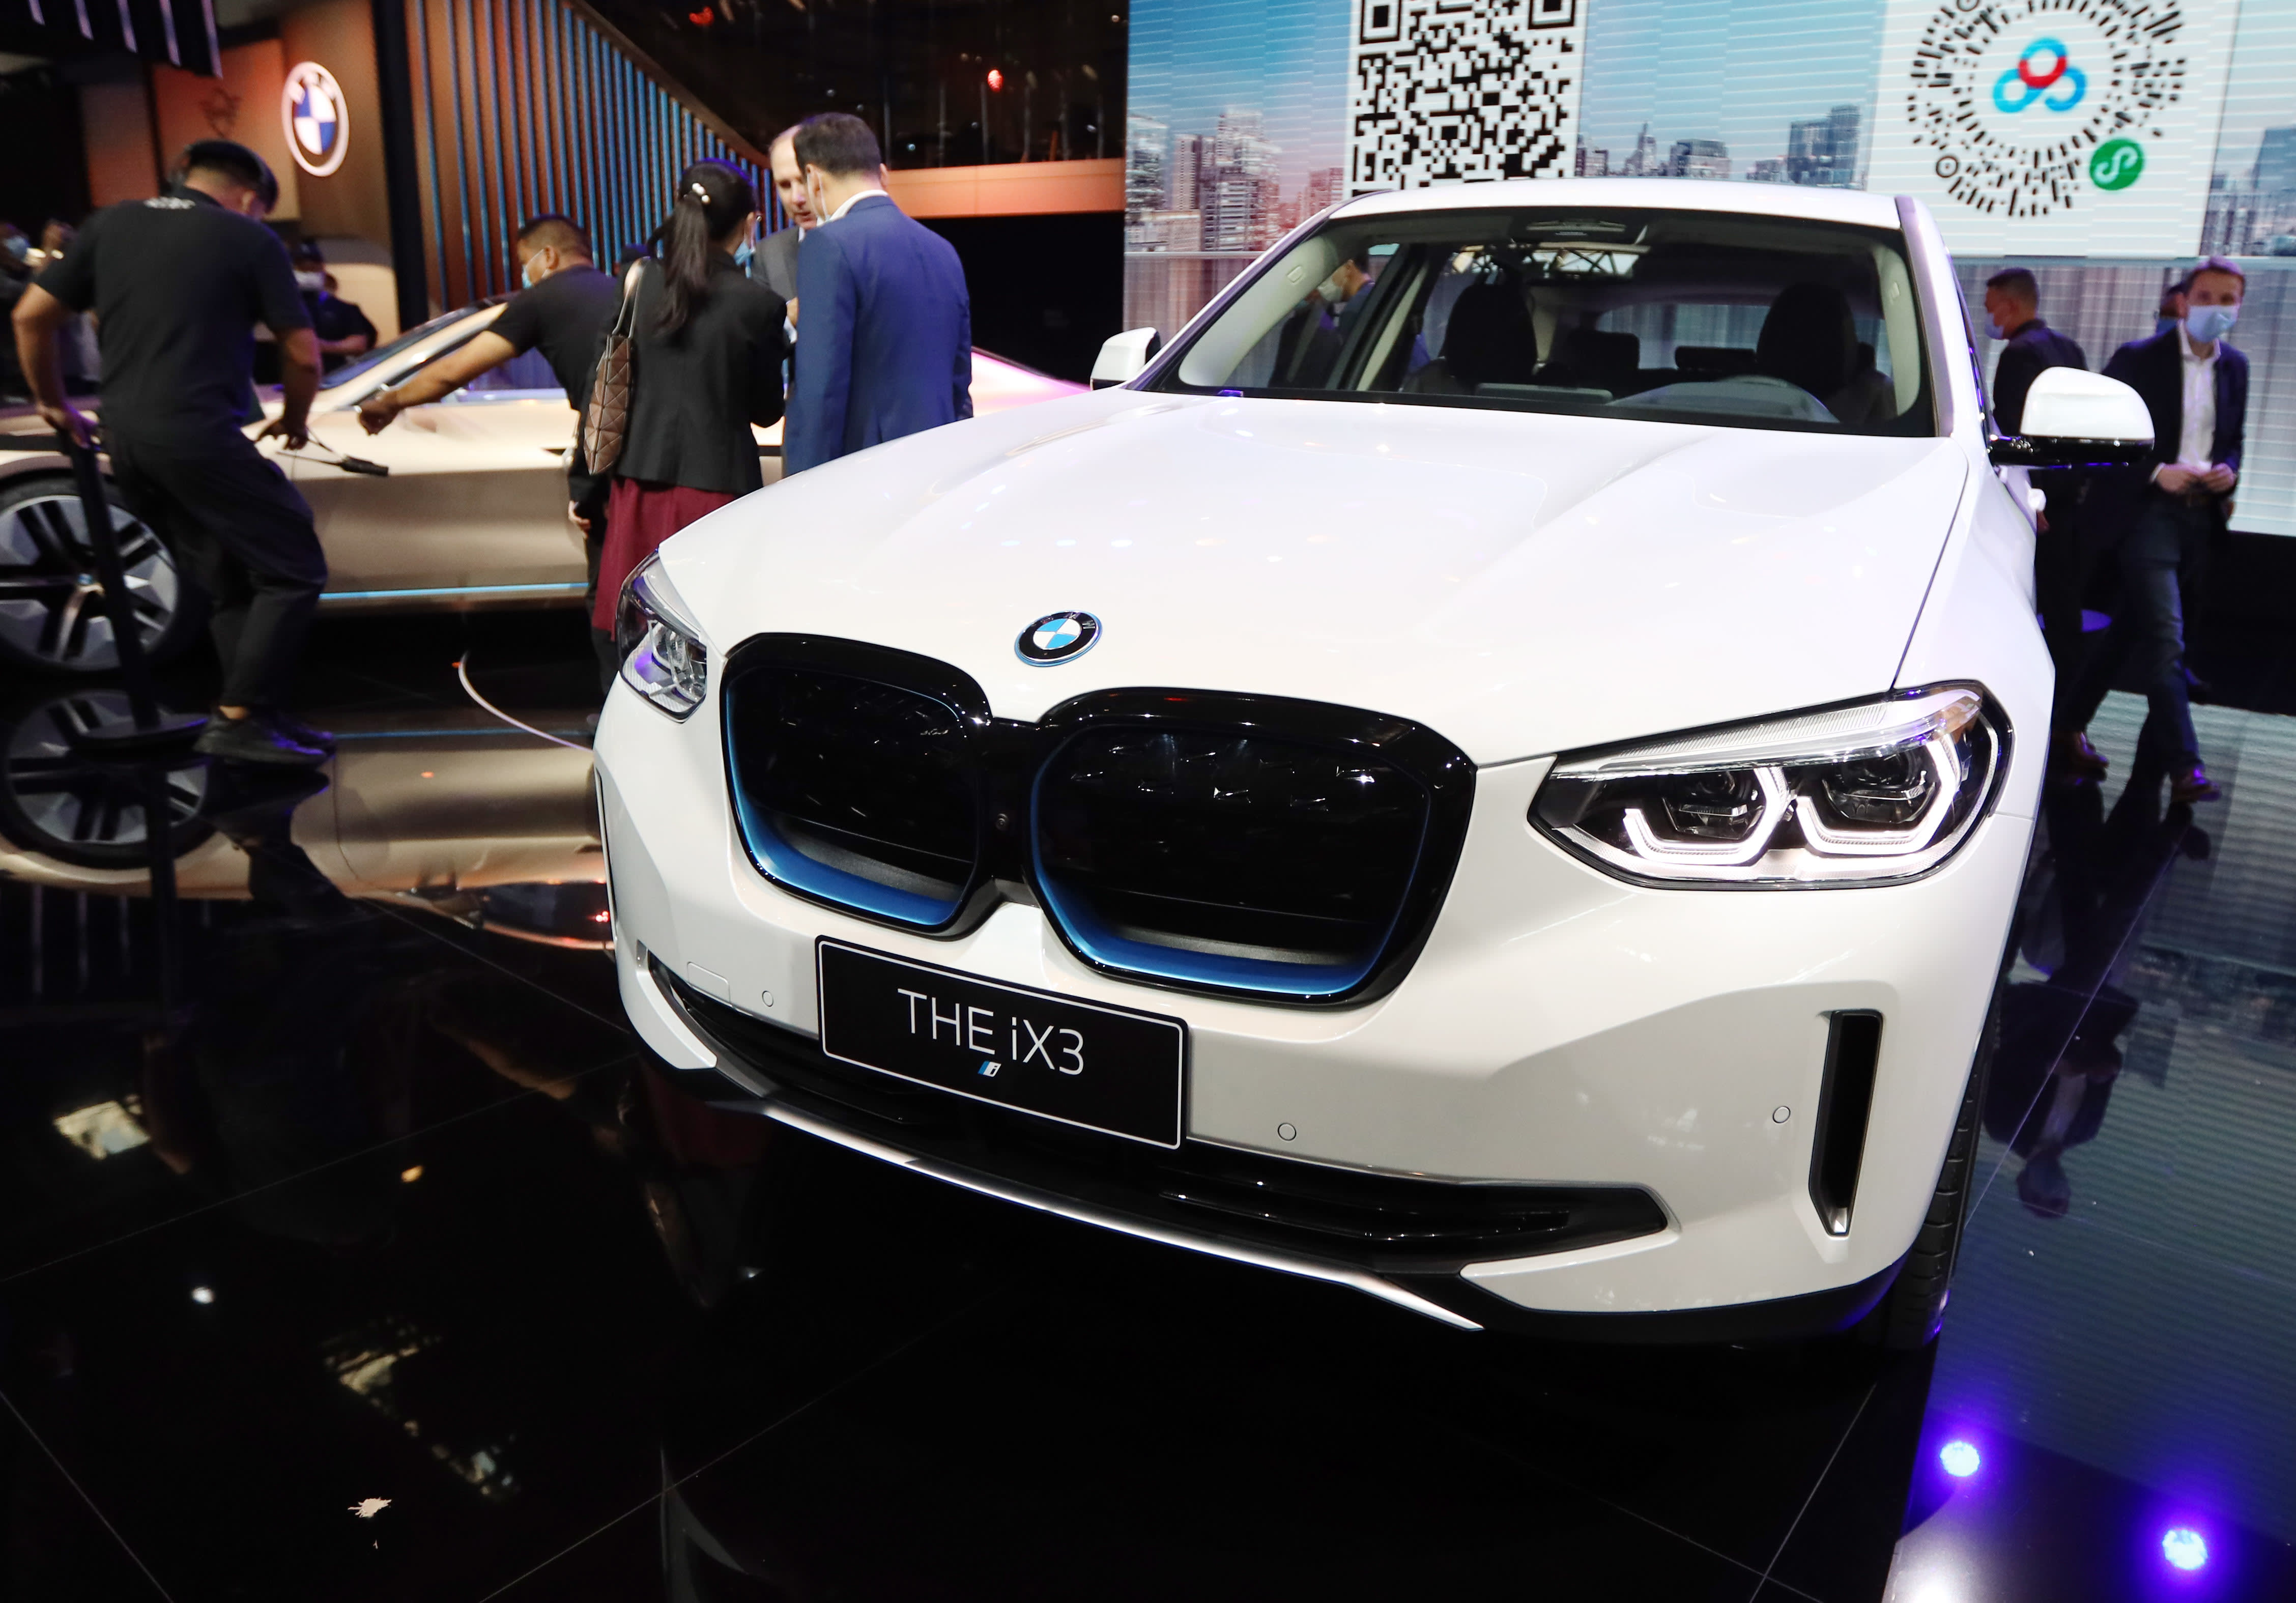 BMW is reducing the prices of its electric SUV made in China by $ 10,000